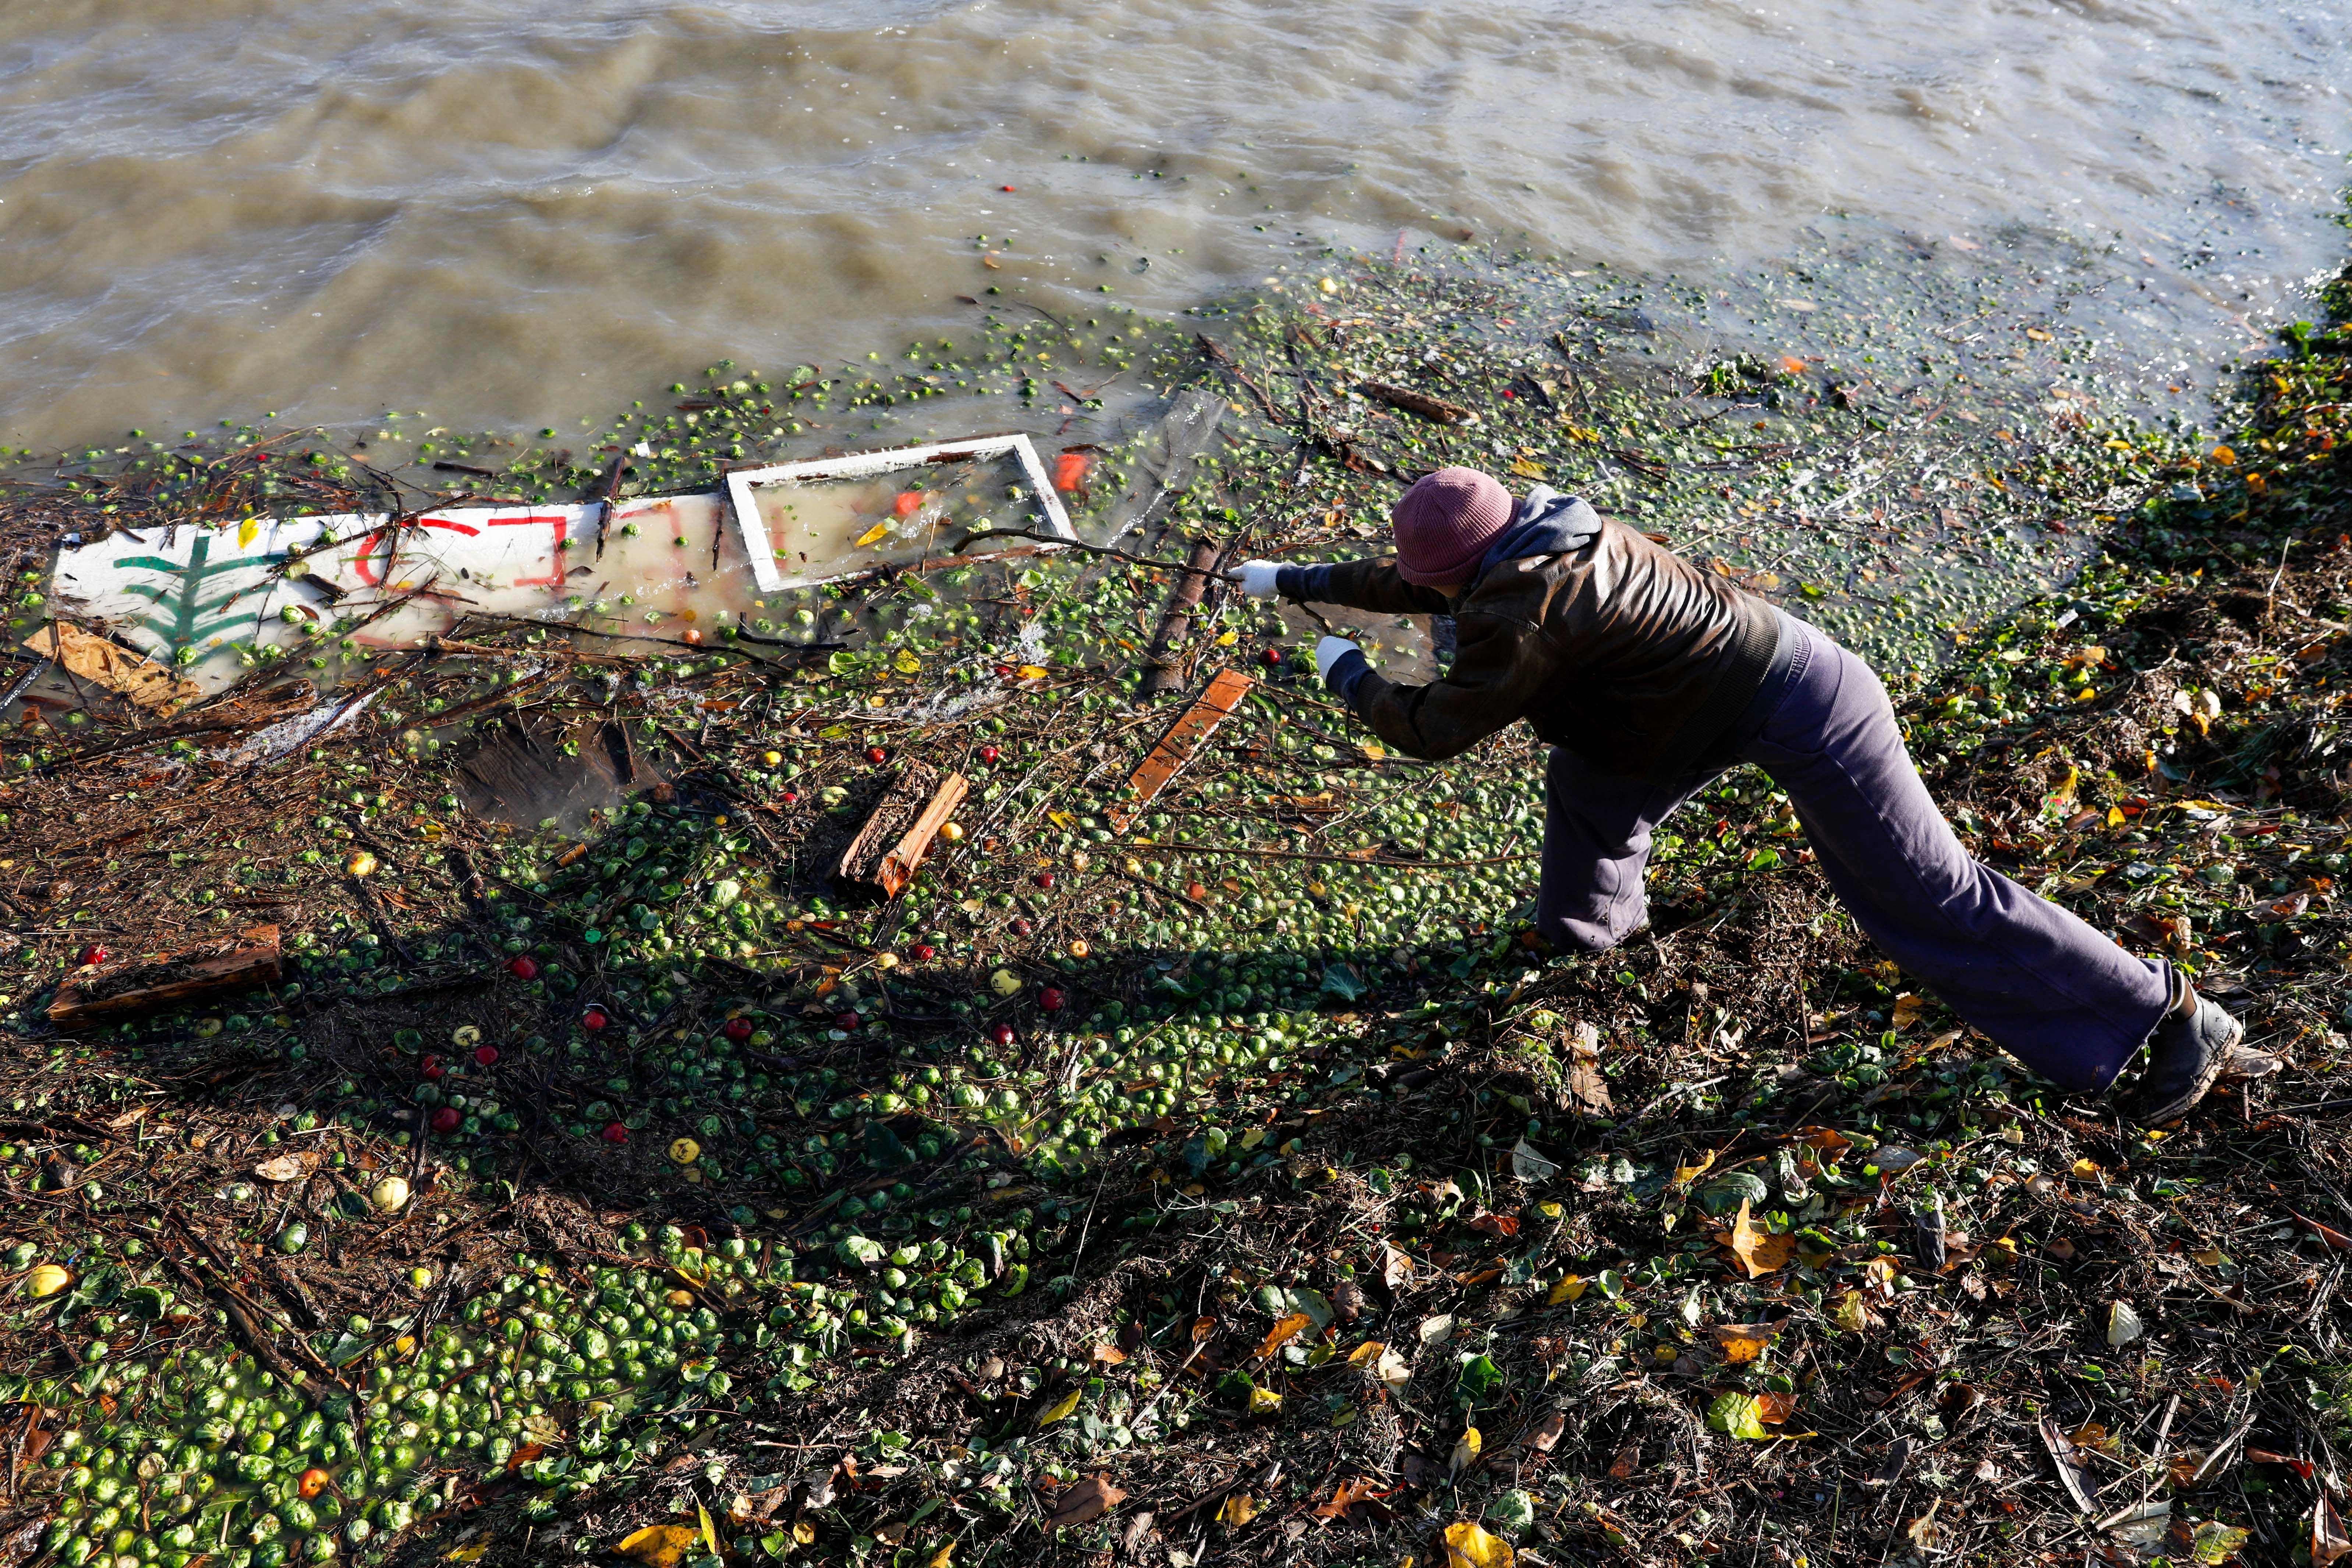 A woman in Burlington, Washington, fishes trash from the banks of a levee on the flooding Skagit River, on November 17